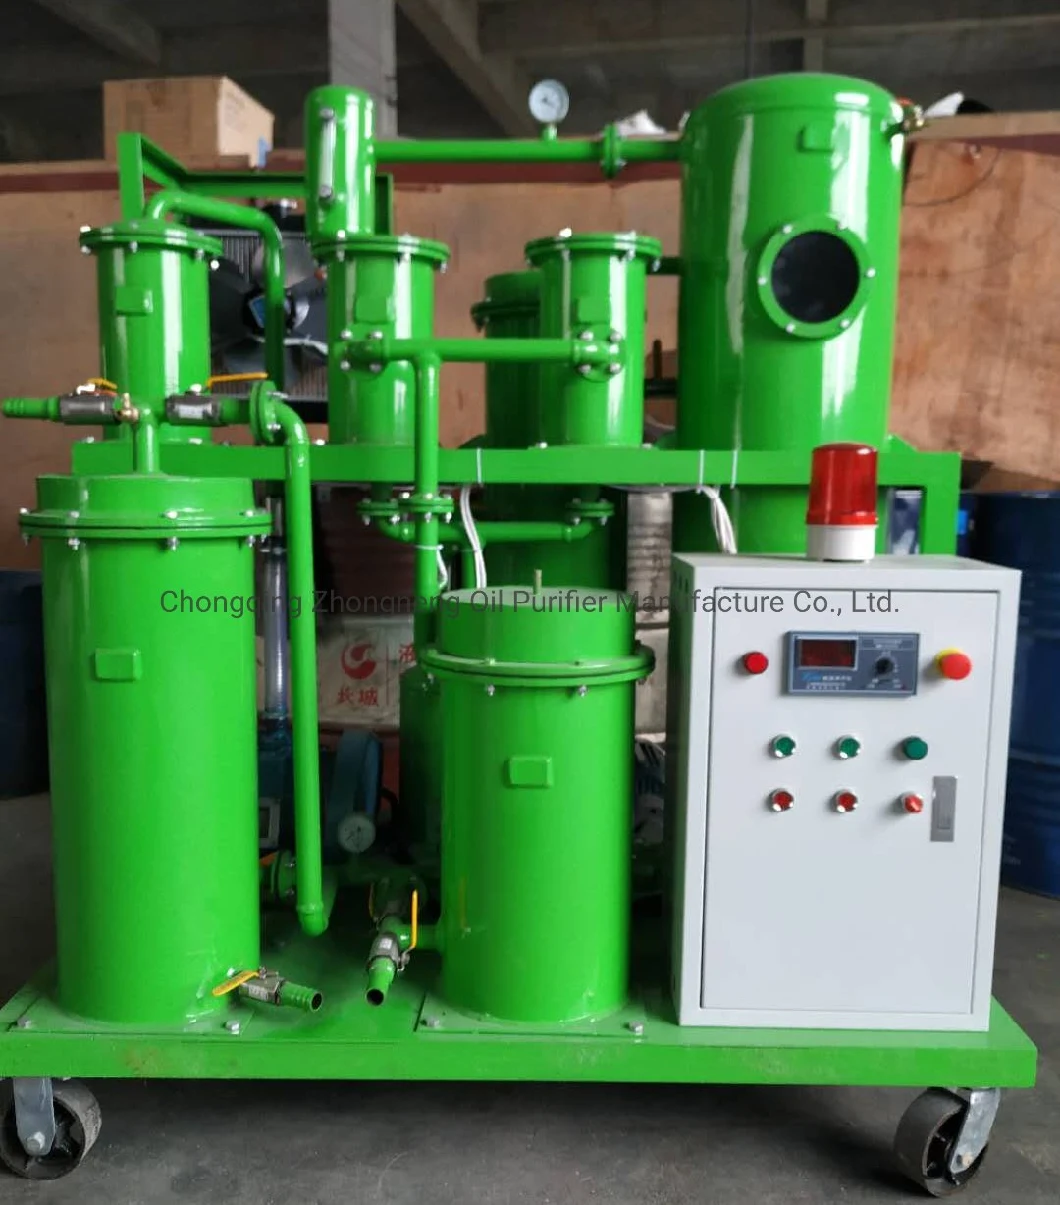 Vacuum Oil Purifier Used for Hydro Power Plant